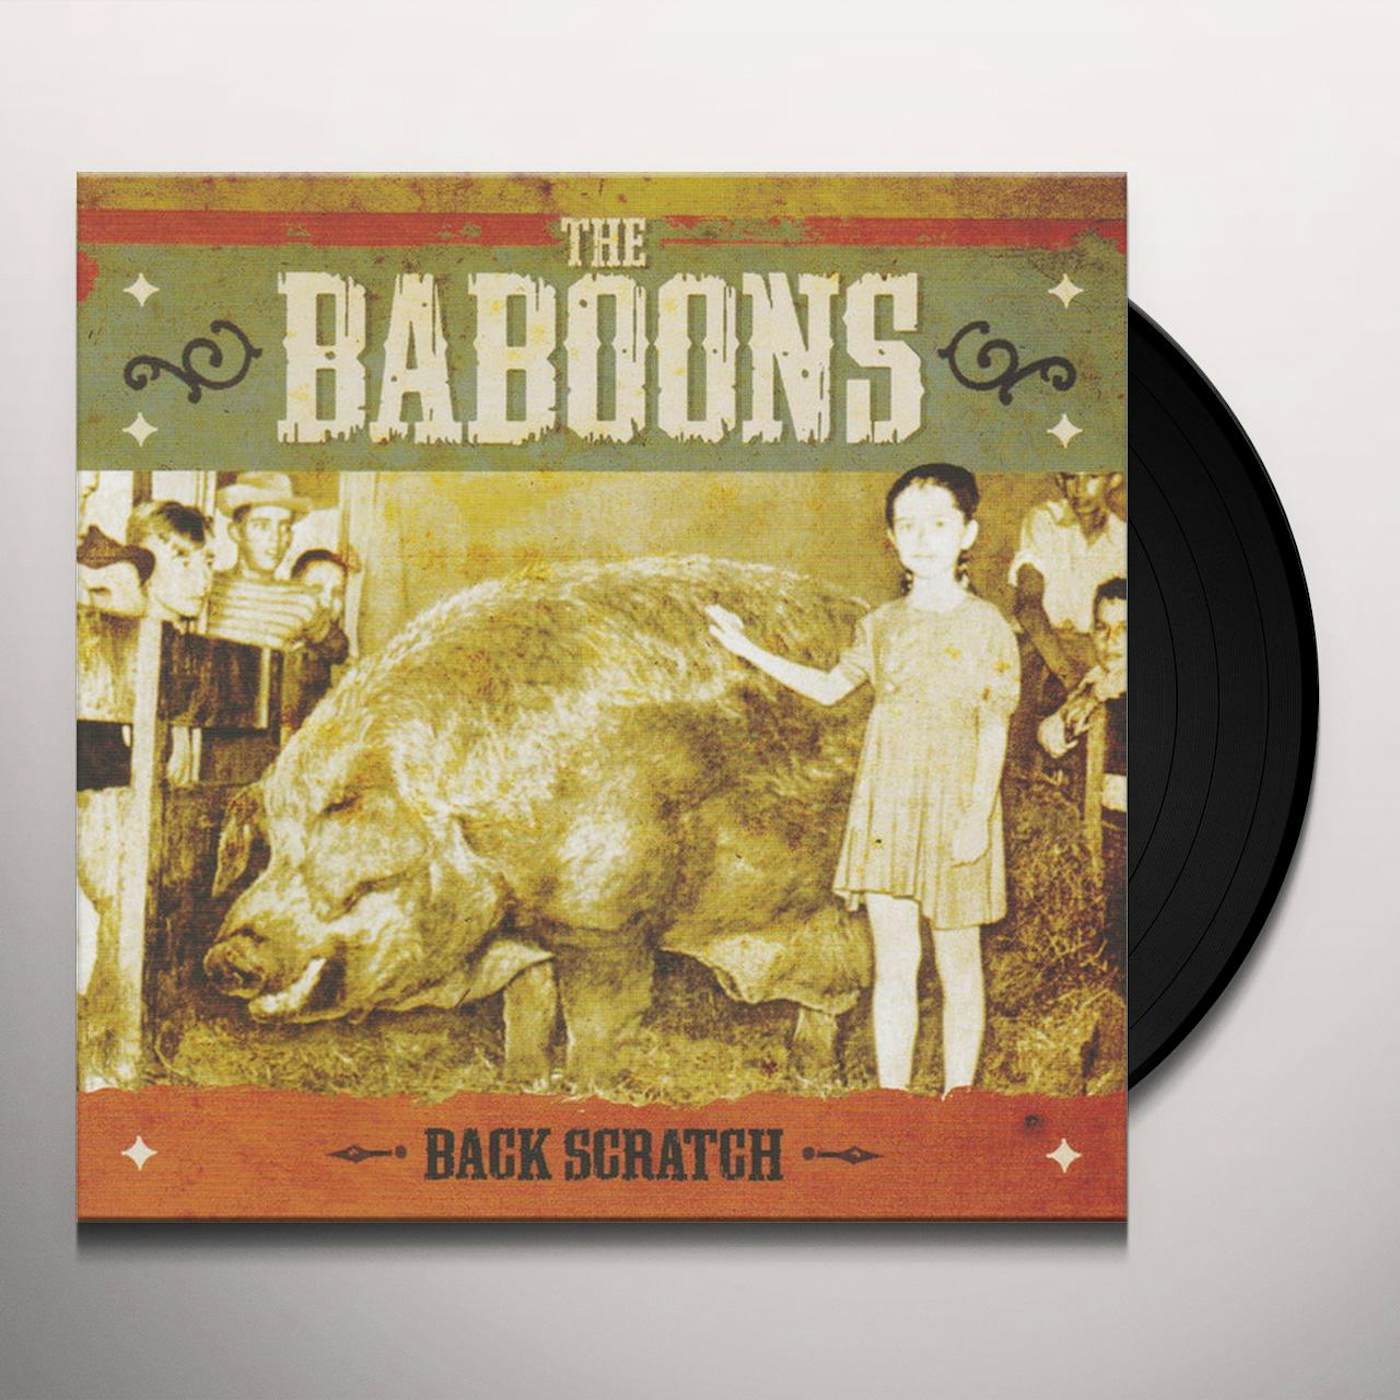 The Baboons Back Scratch Vinyl Record